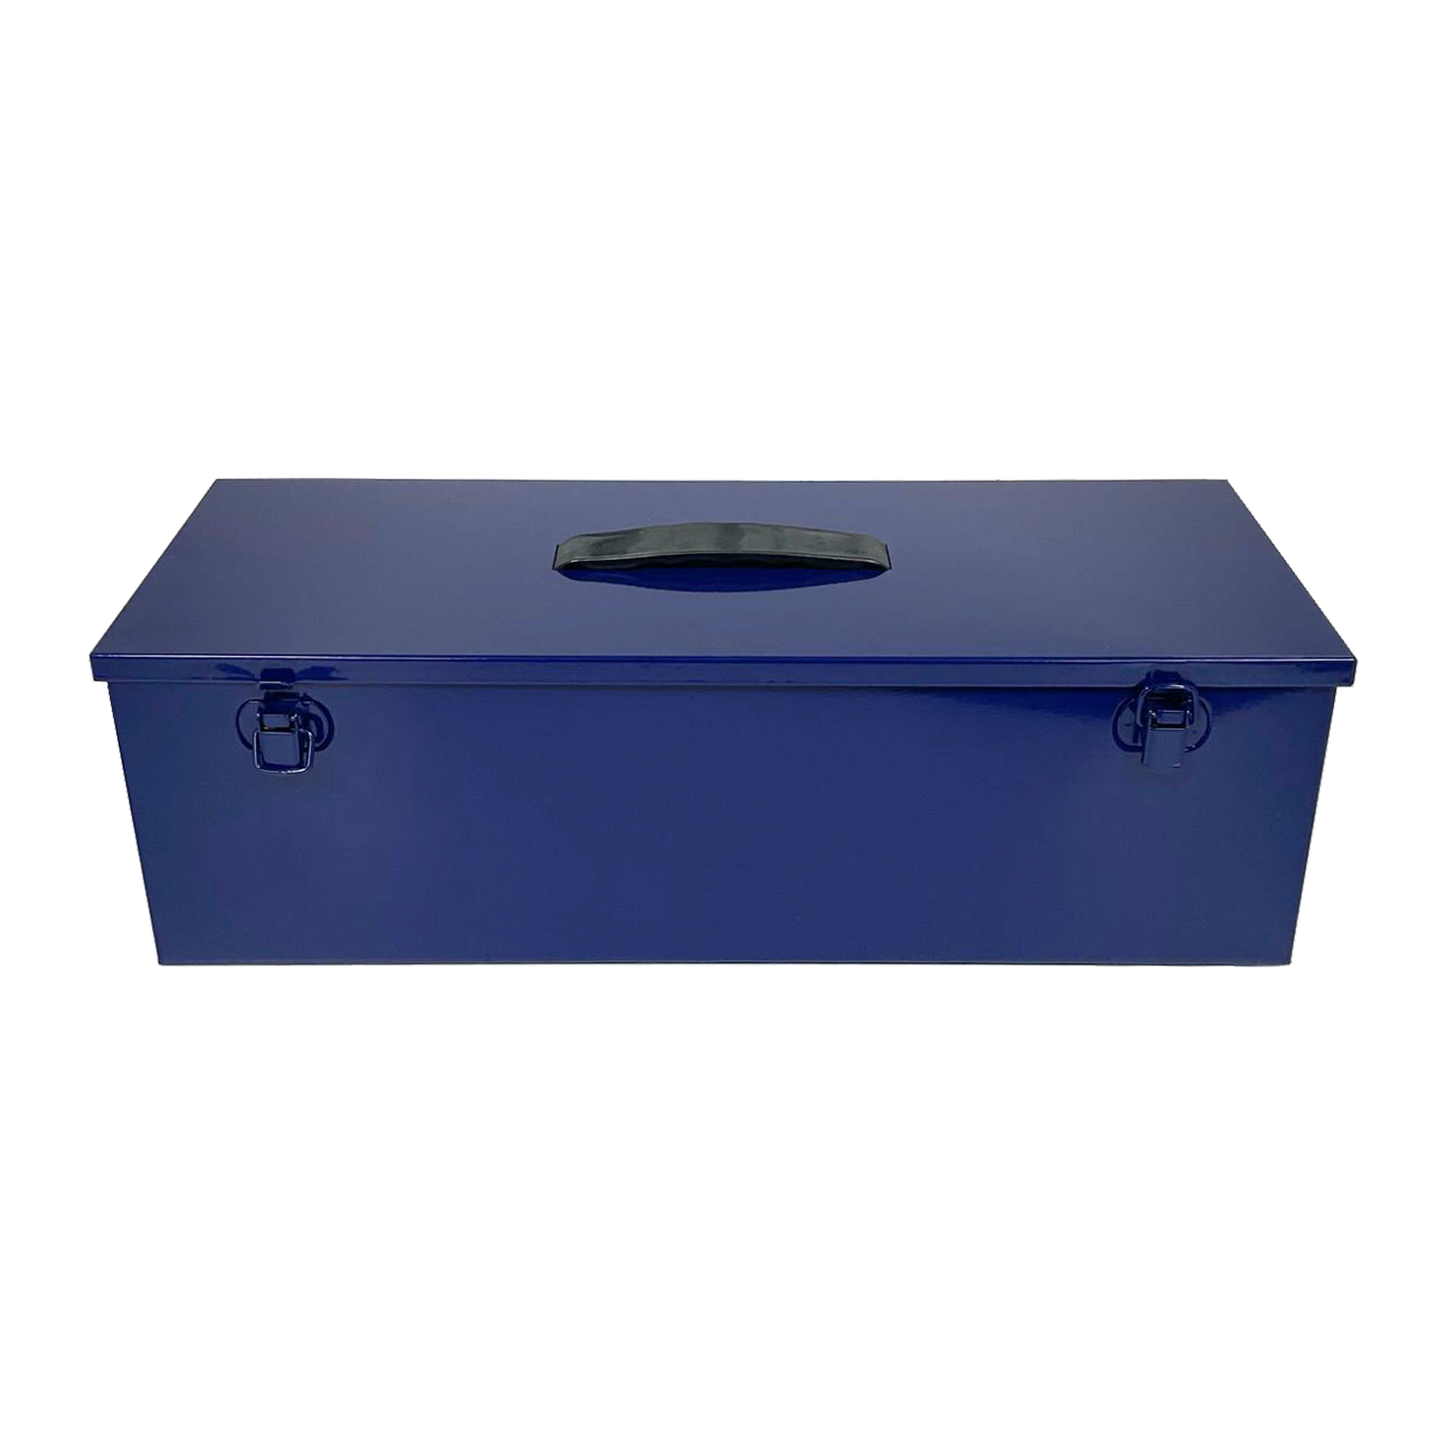 A blue multi-use hobby and tool box featuring a sleek design with a fold down black plastic carrying handle and double toggle closure, isolated on a white background.